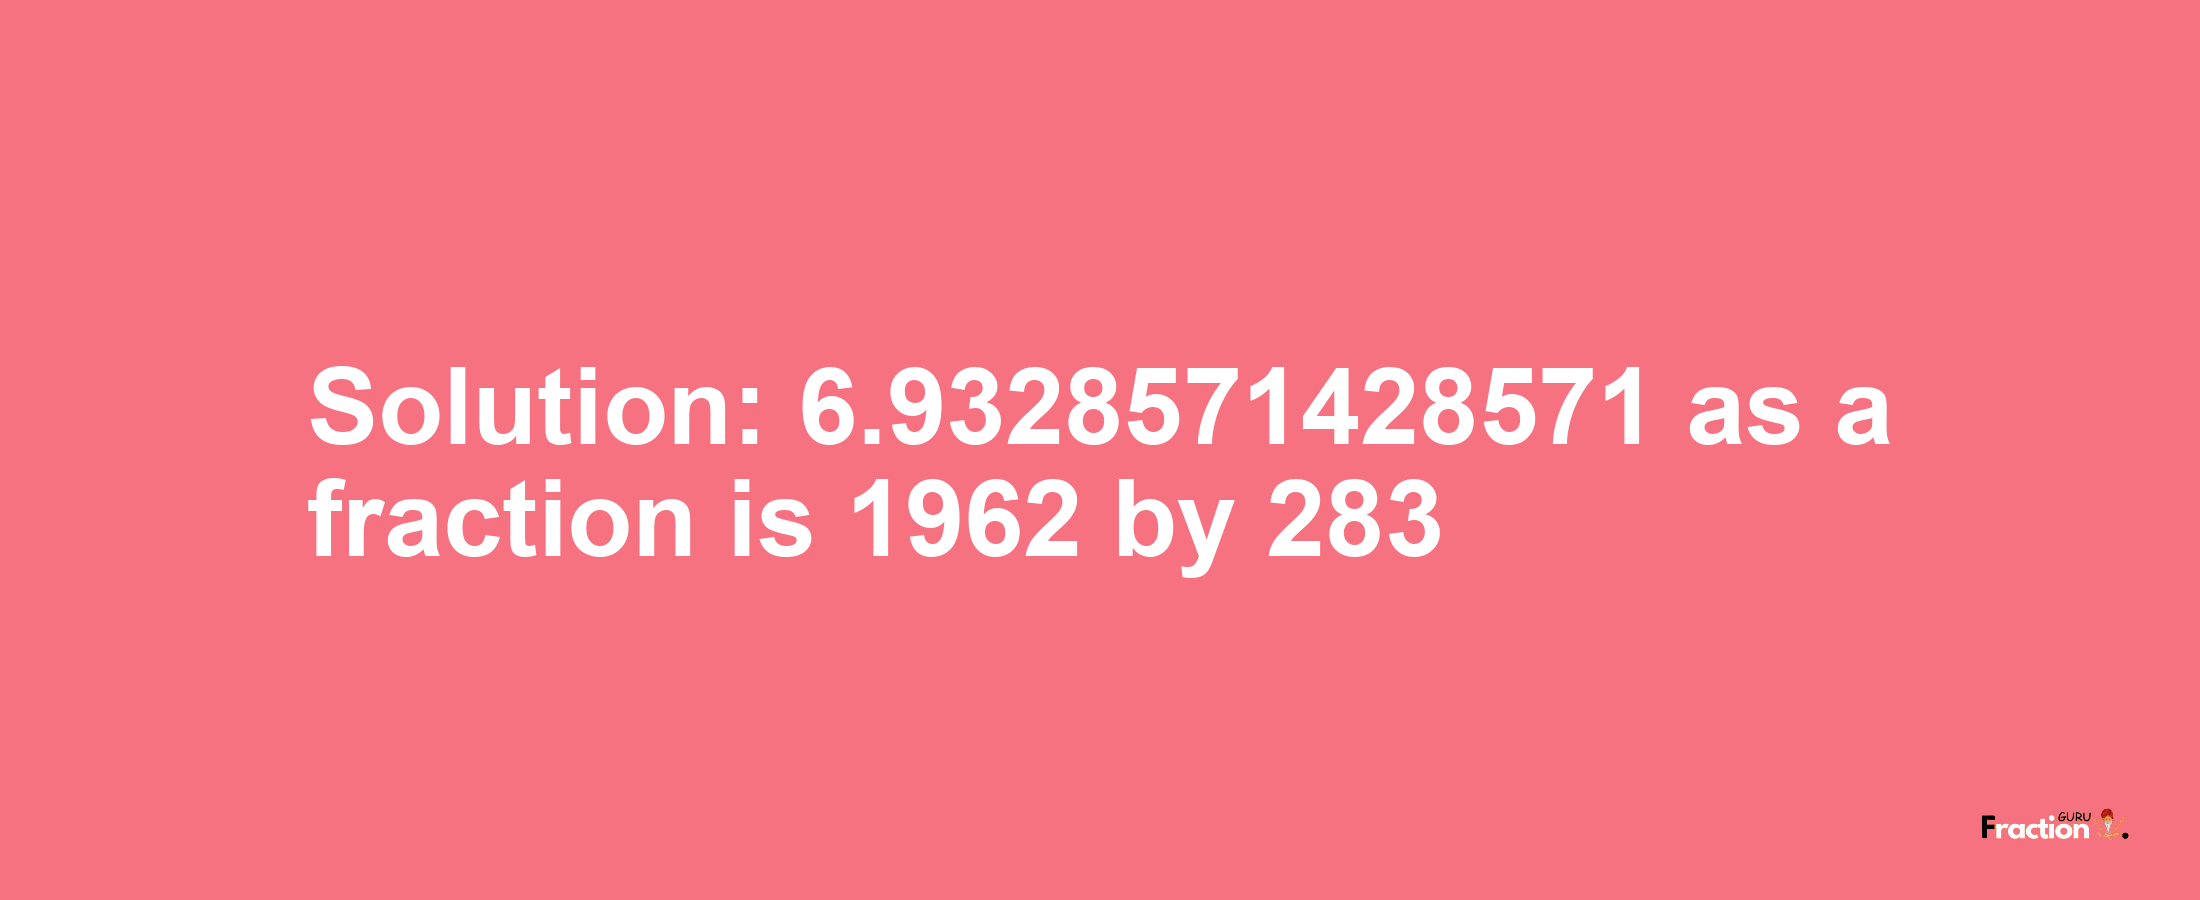 Solution:6.9328571428571 as a fraction is 1962/283